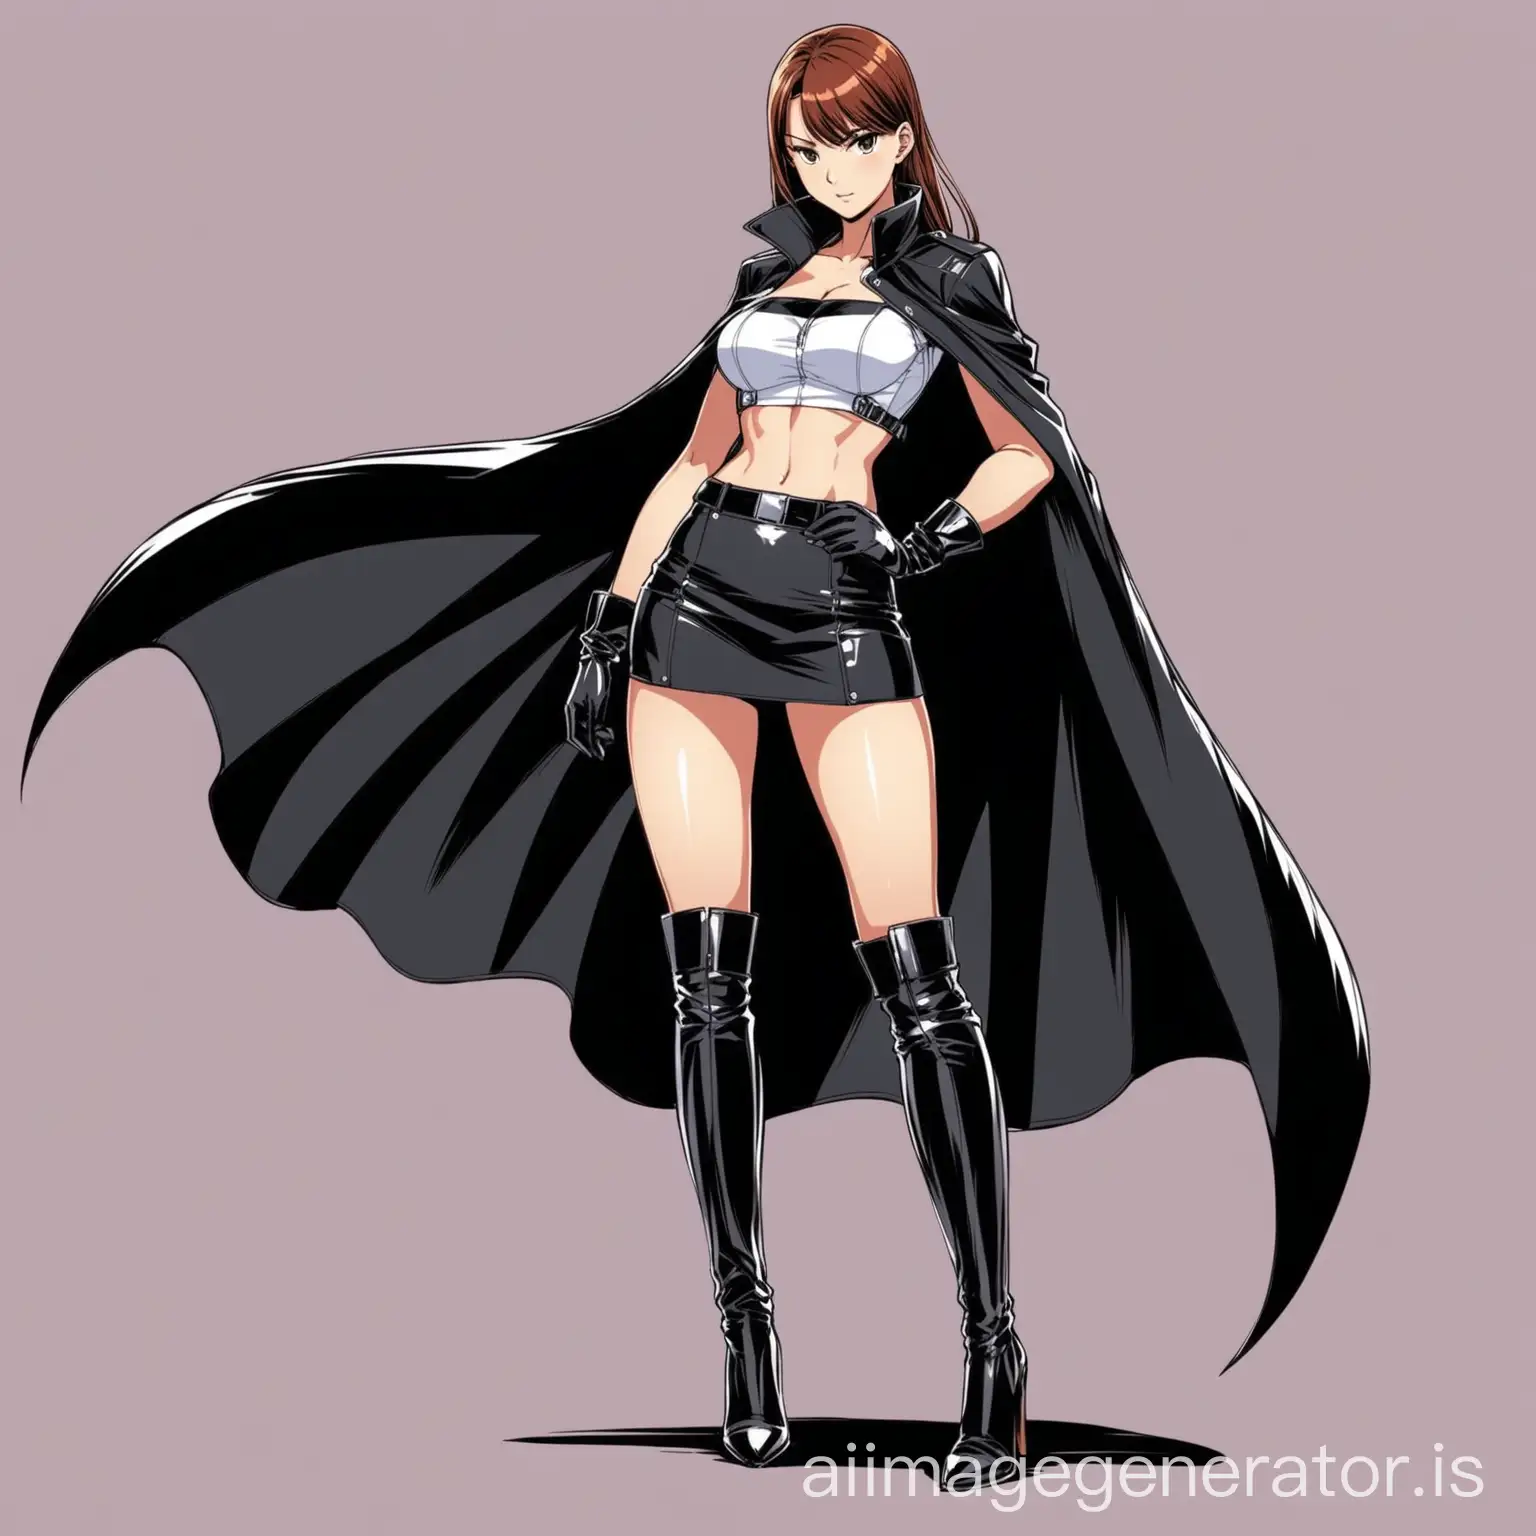 Sultry-Secret-Agent-Seductive-Anime-Girl-in-Croptop-Skirt-and-Leather-Gloves